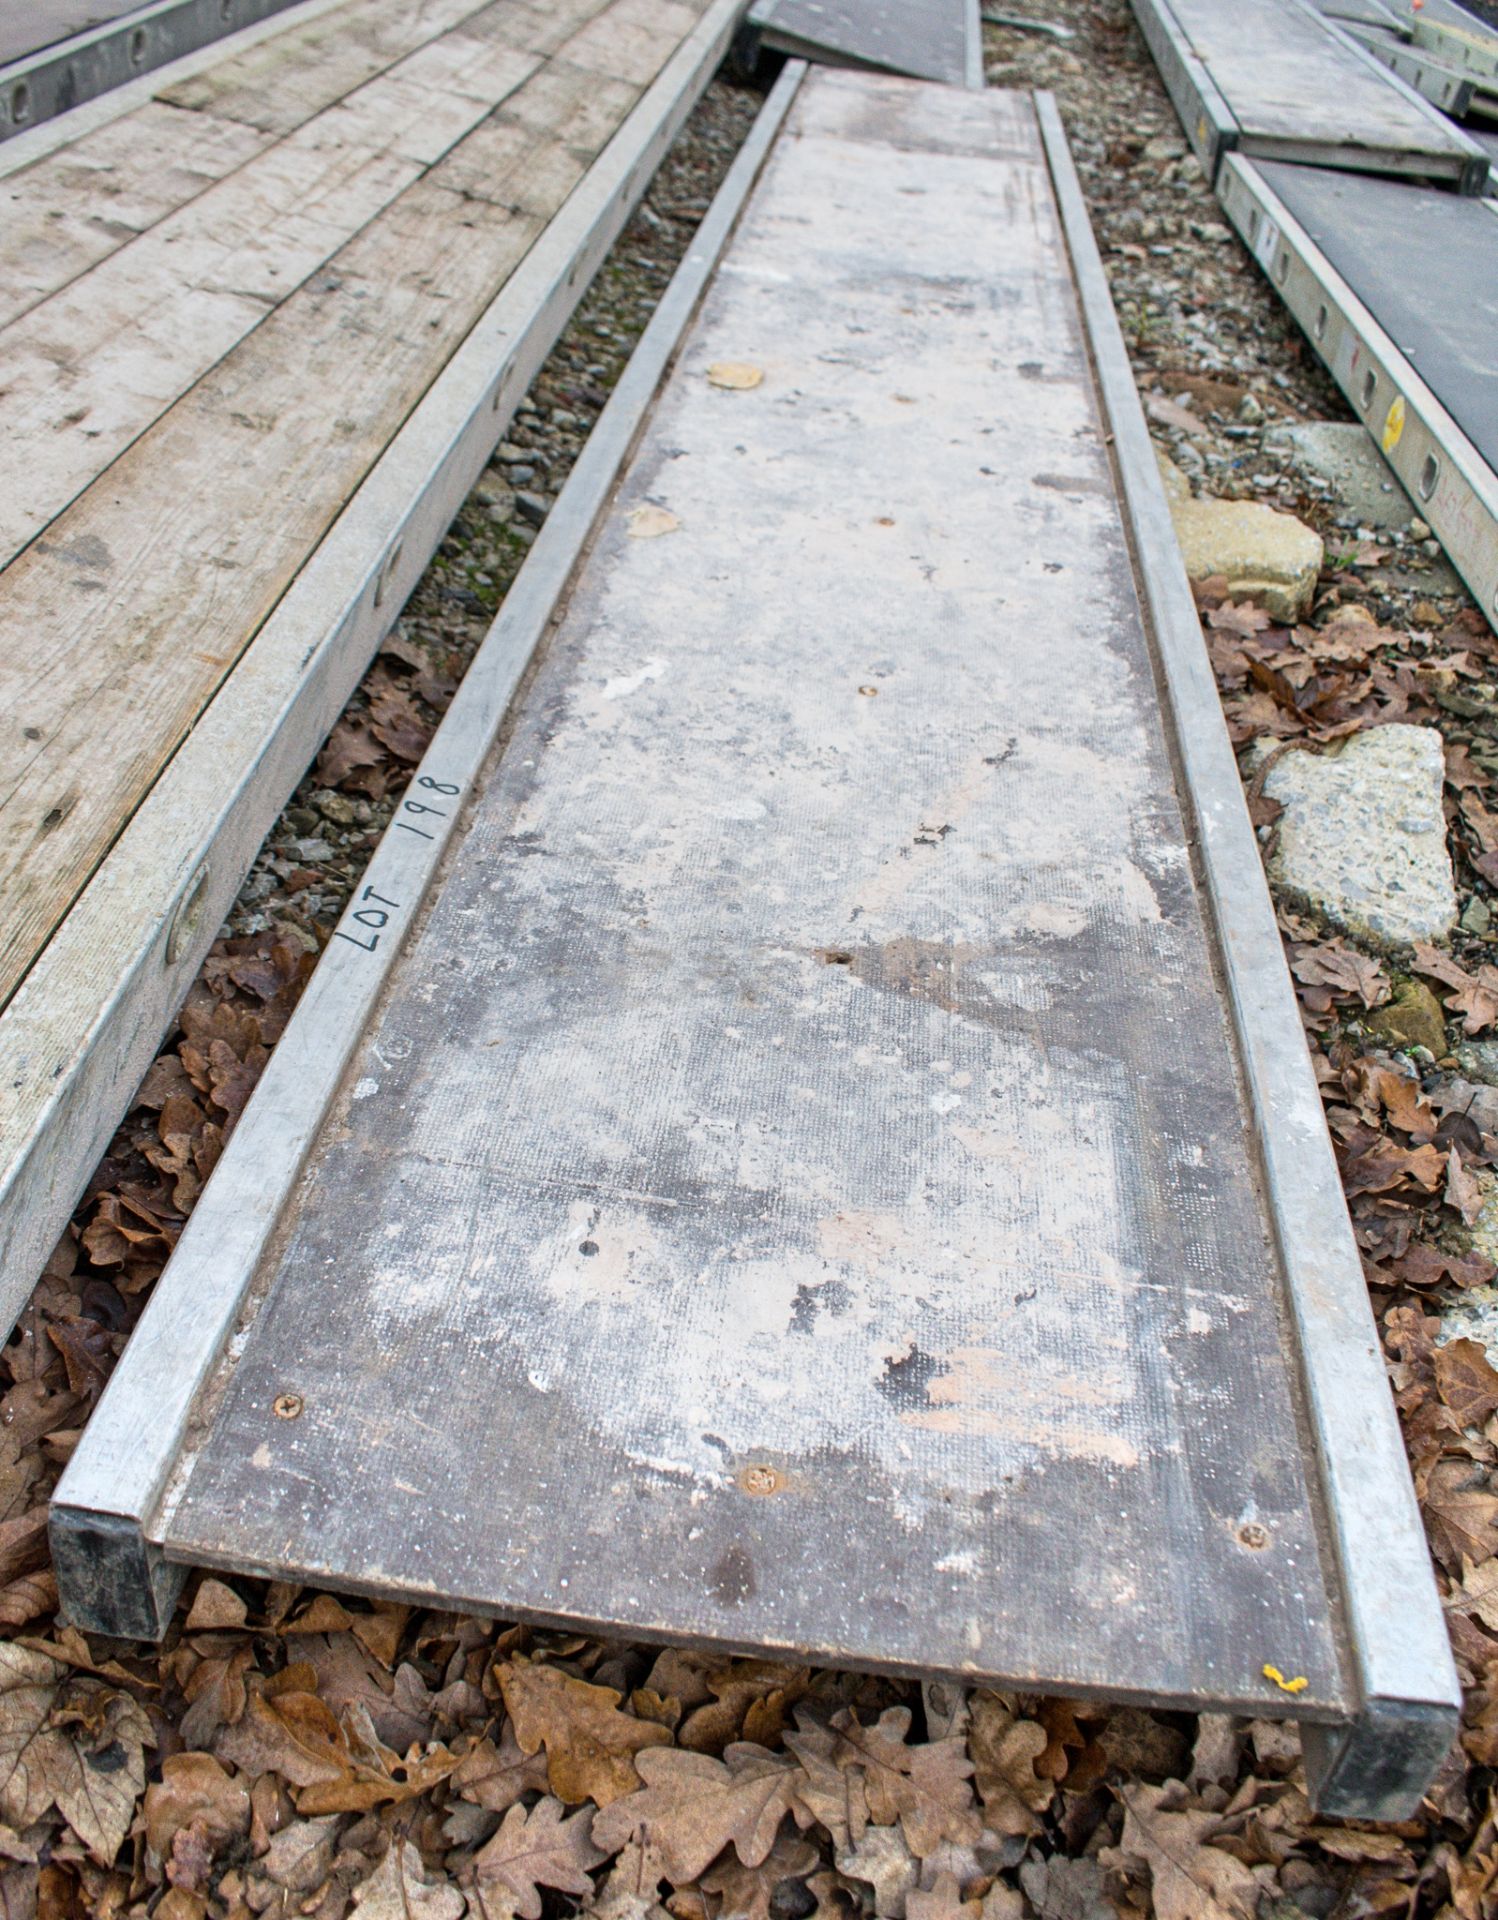 Aluminium staging board approximately 9 ft